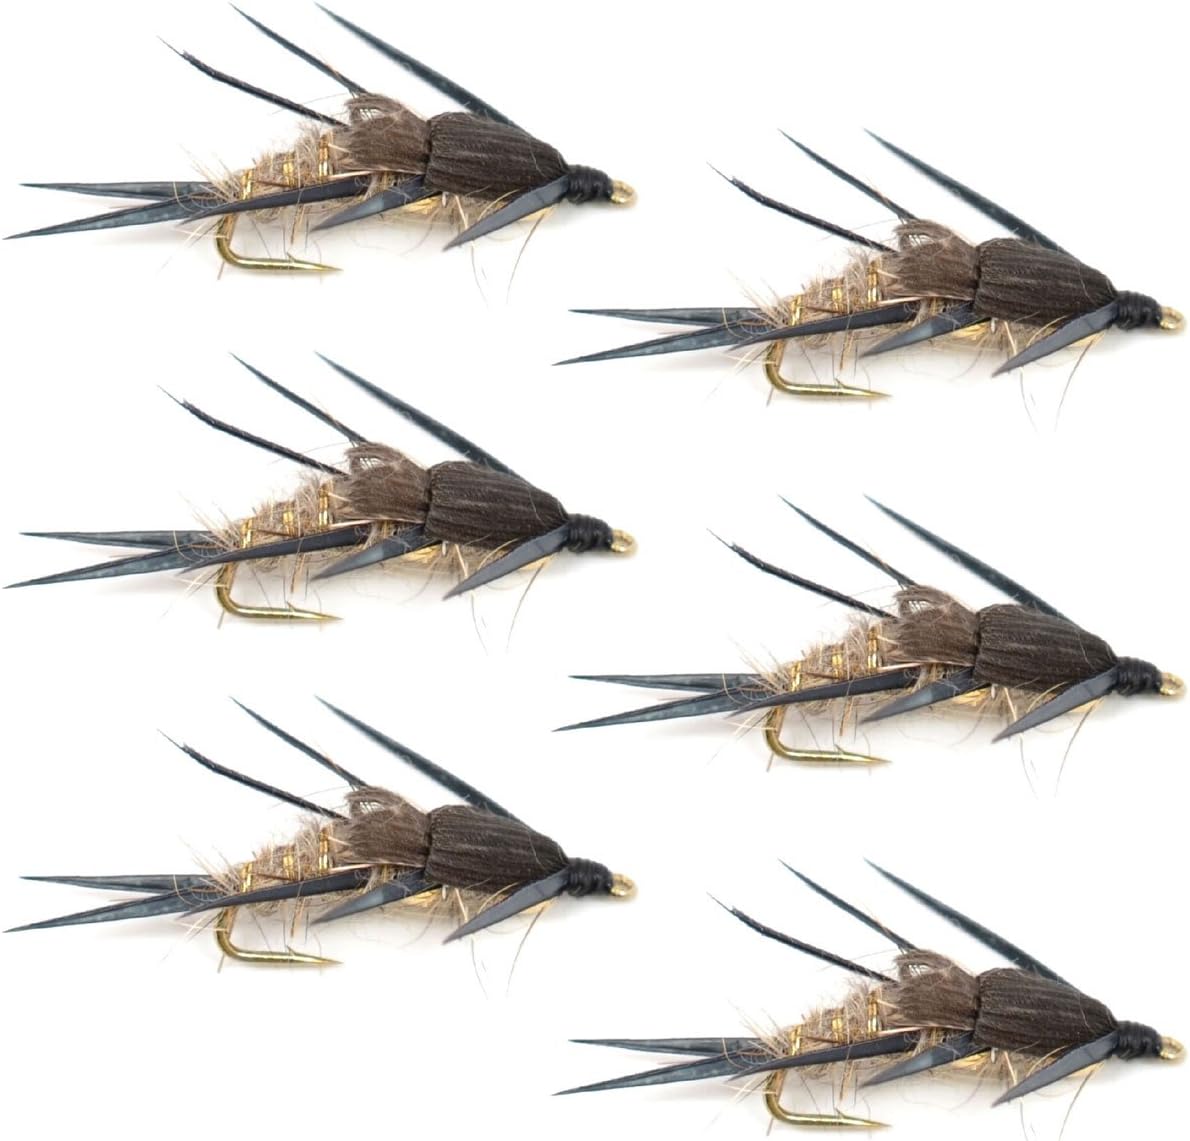 Double Bead Gold Ribbed Hare's Ear Nymph Fly Fishing Flies - Trout and Bass Wet Fly - 6 Flies Hook Size 8